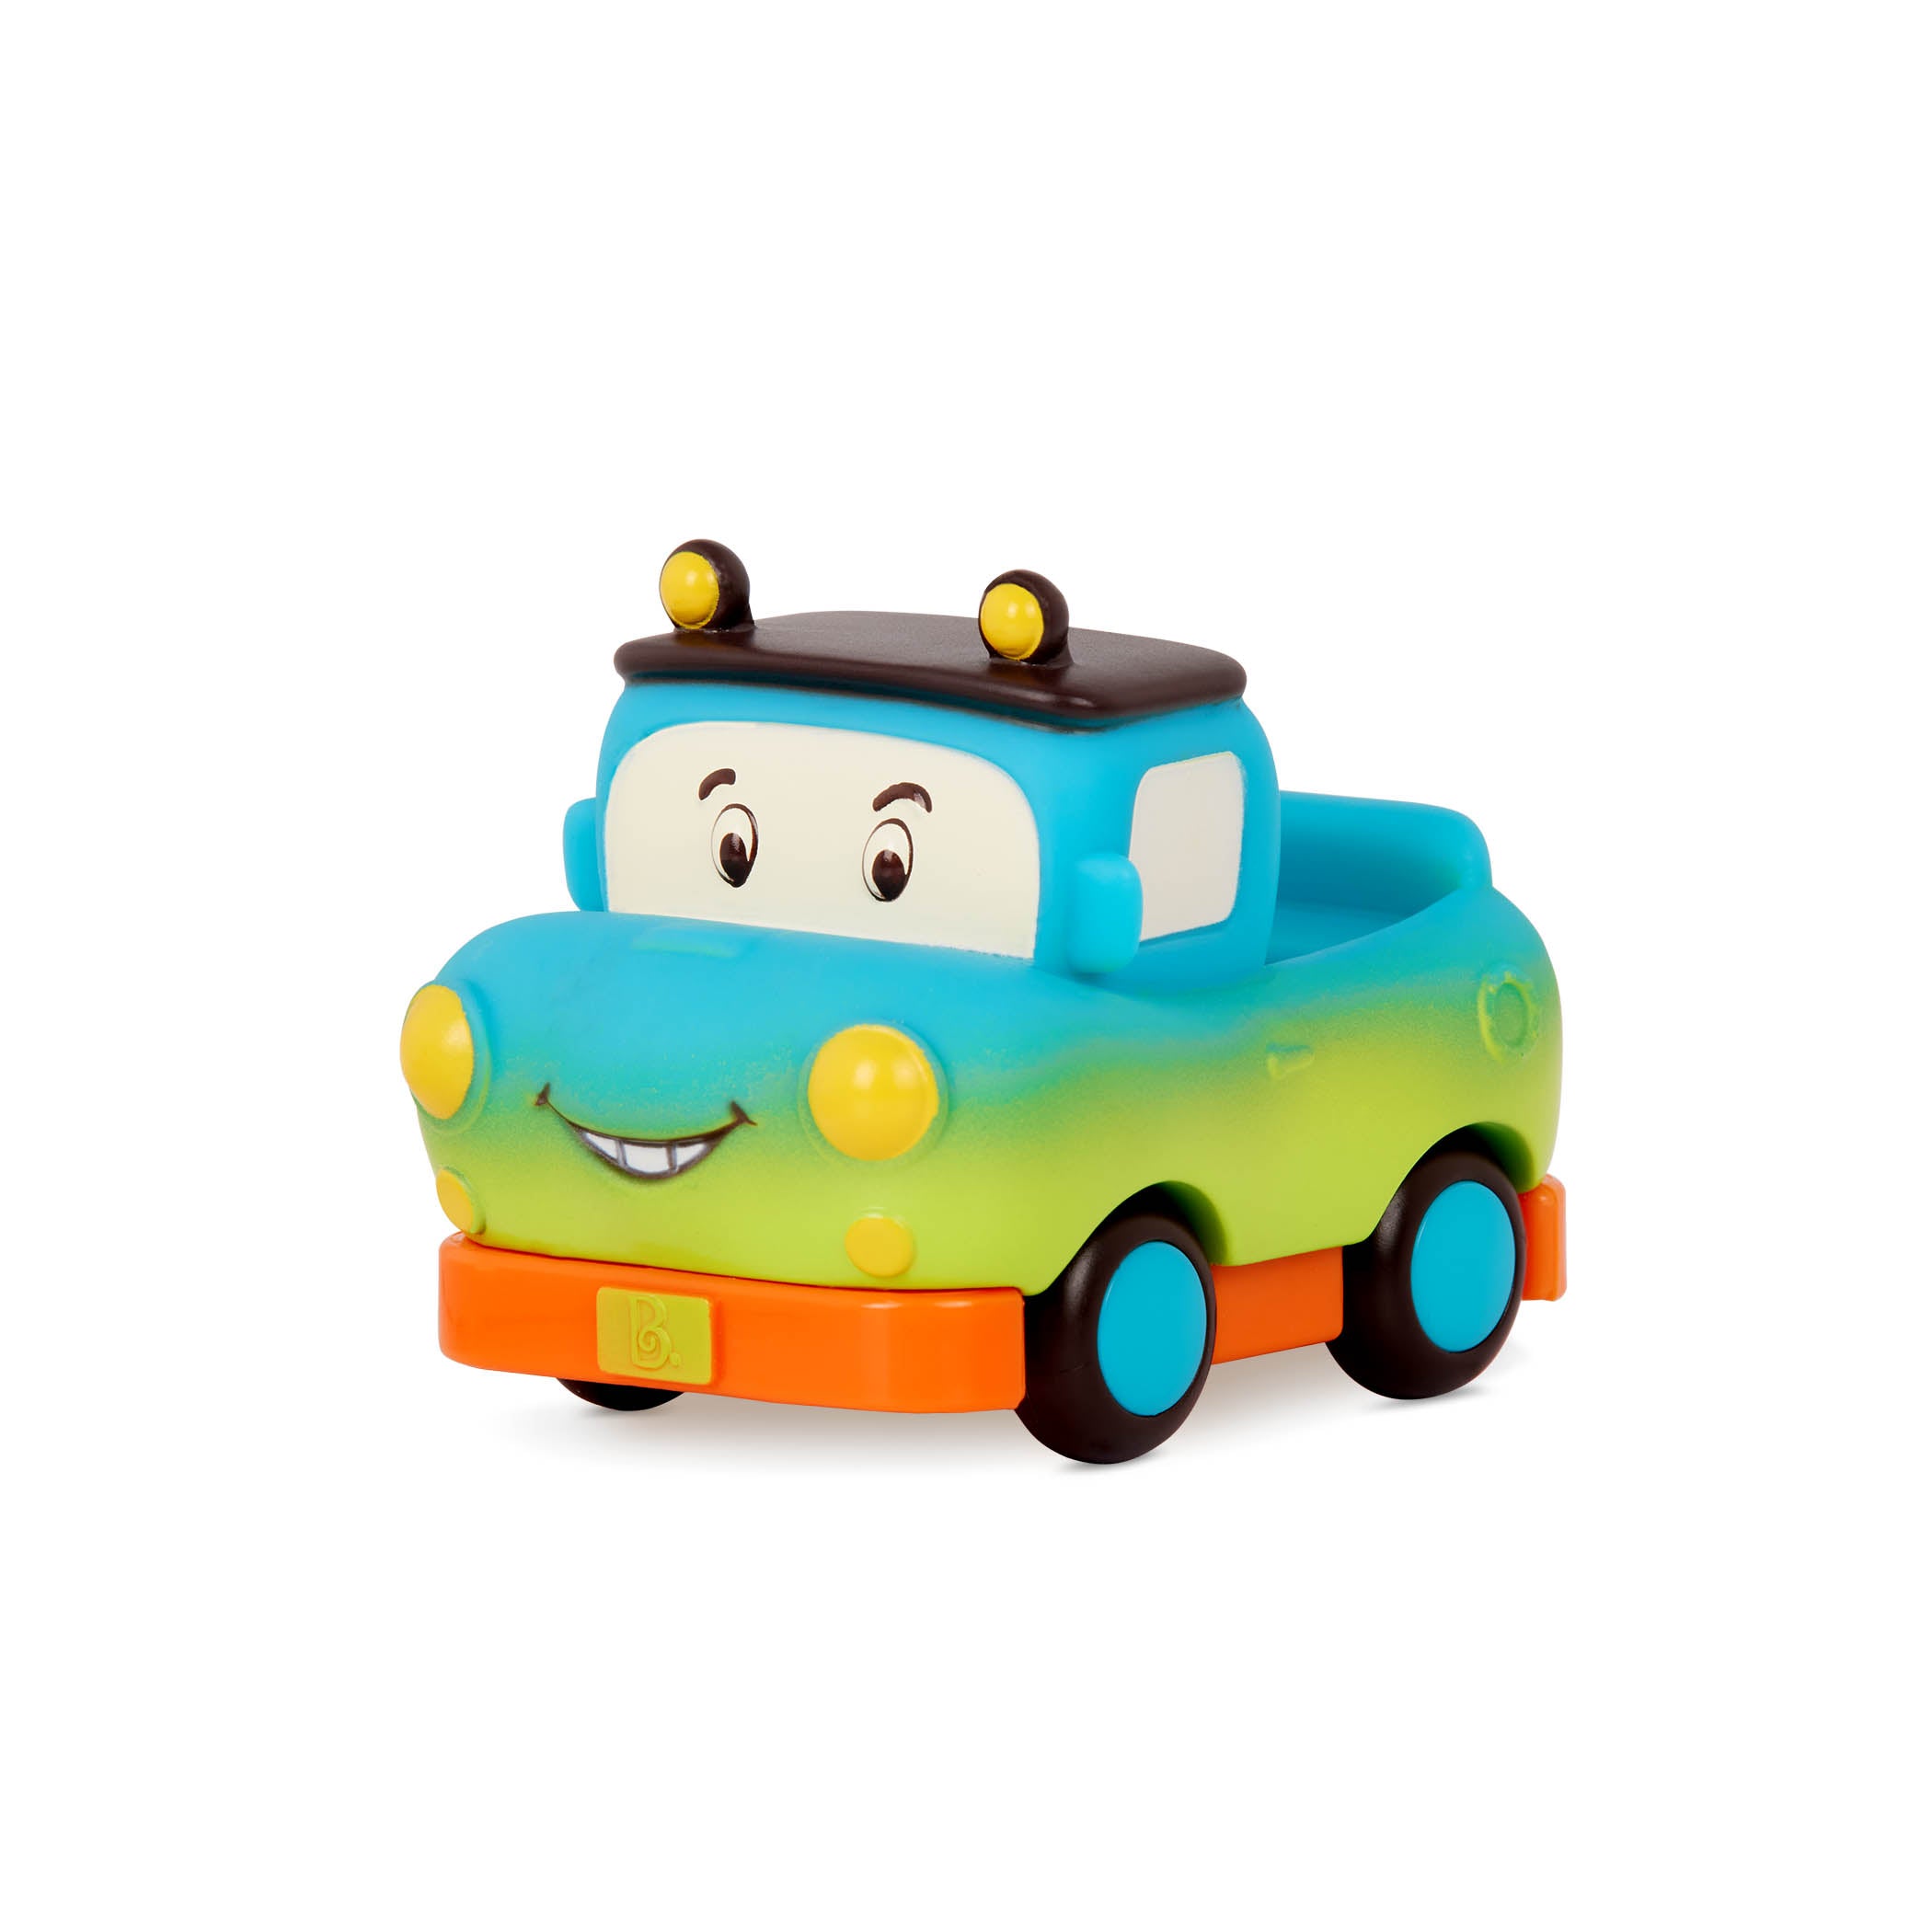 Wheeee-ls, 4 Pull-Back Toy Vehicles